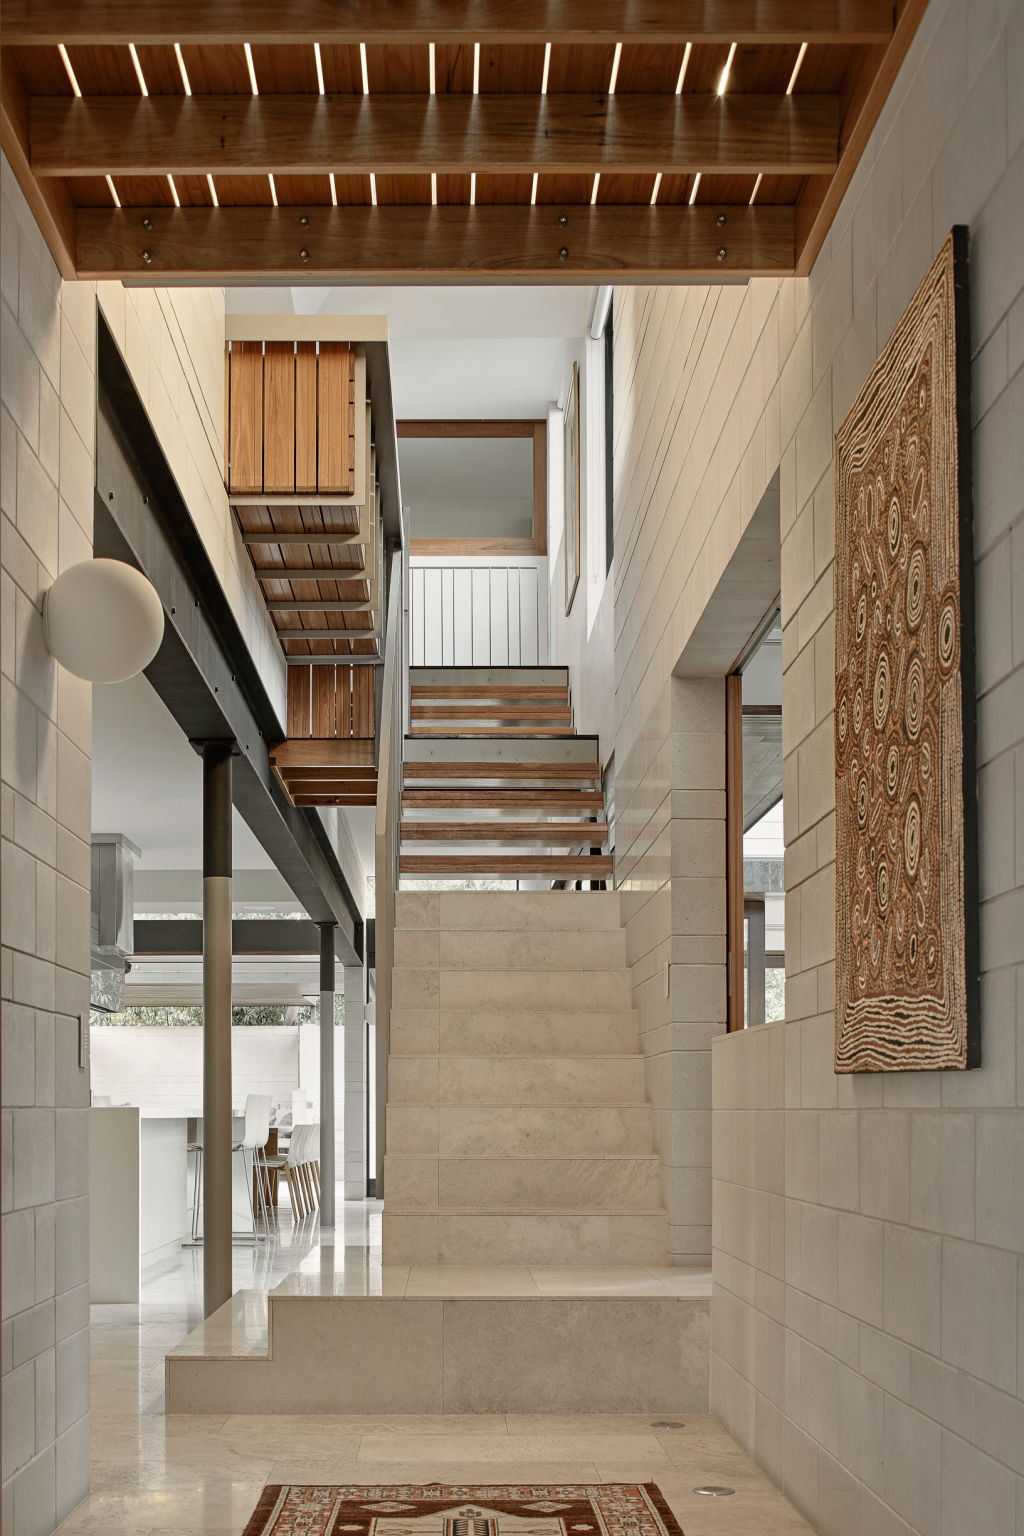 The property features four bedrooms upstairs. Photo: Supplied